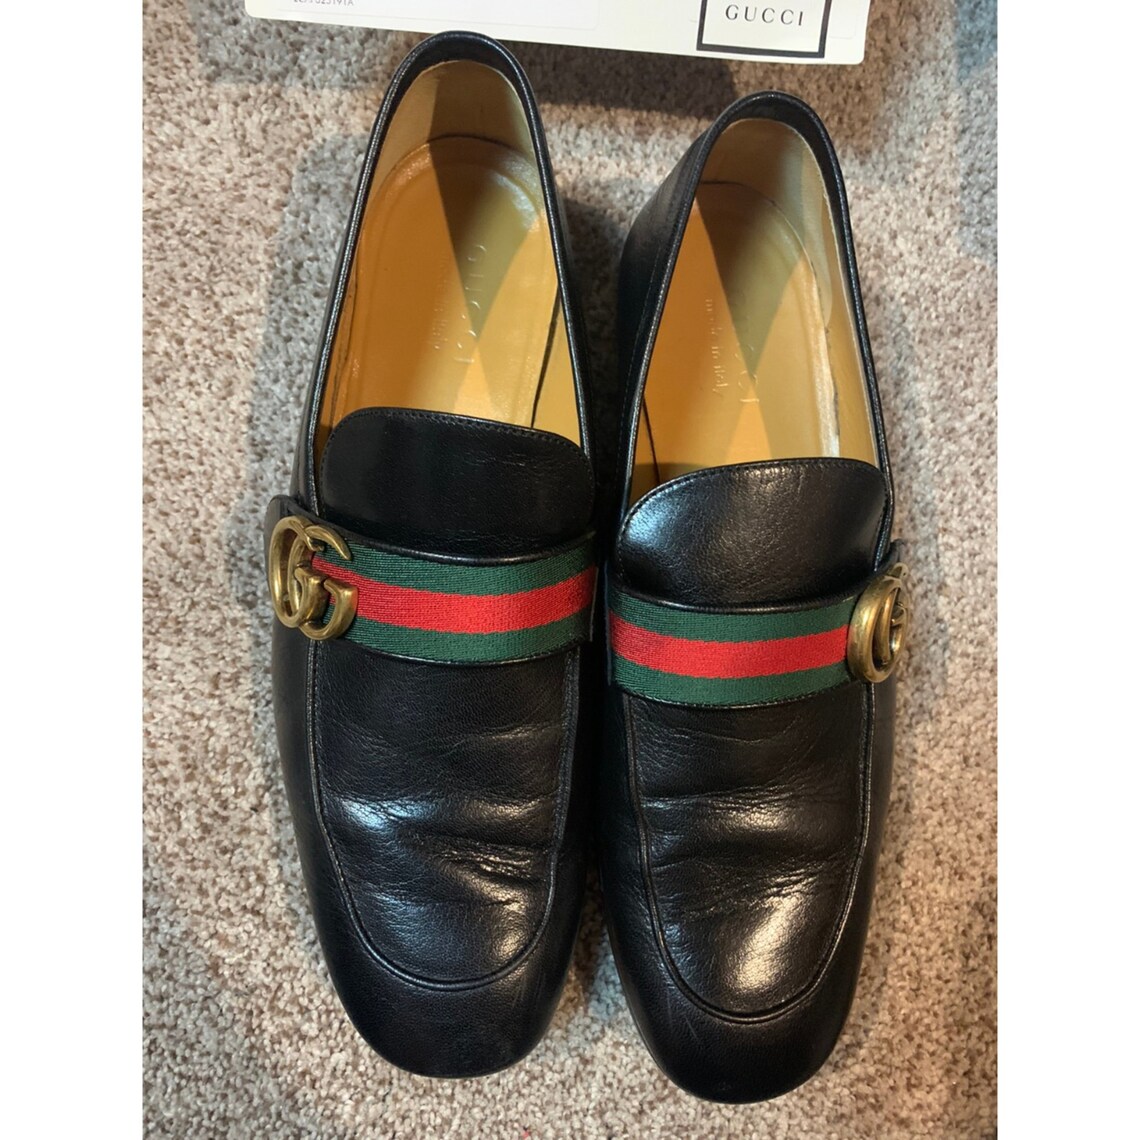 Gucci logo strap loafers slip ons w/ box Size US 8.5 | Etsy